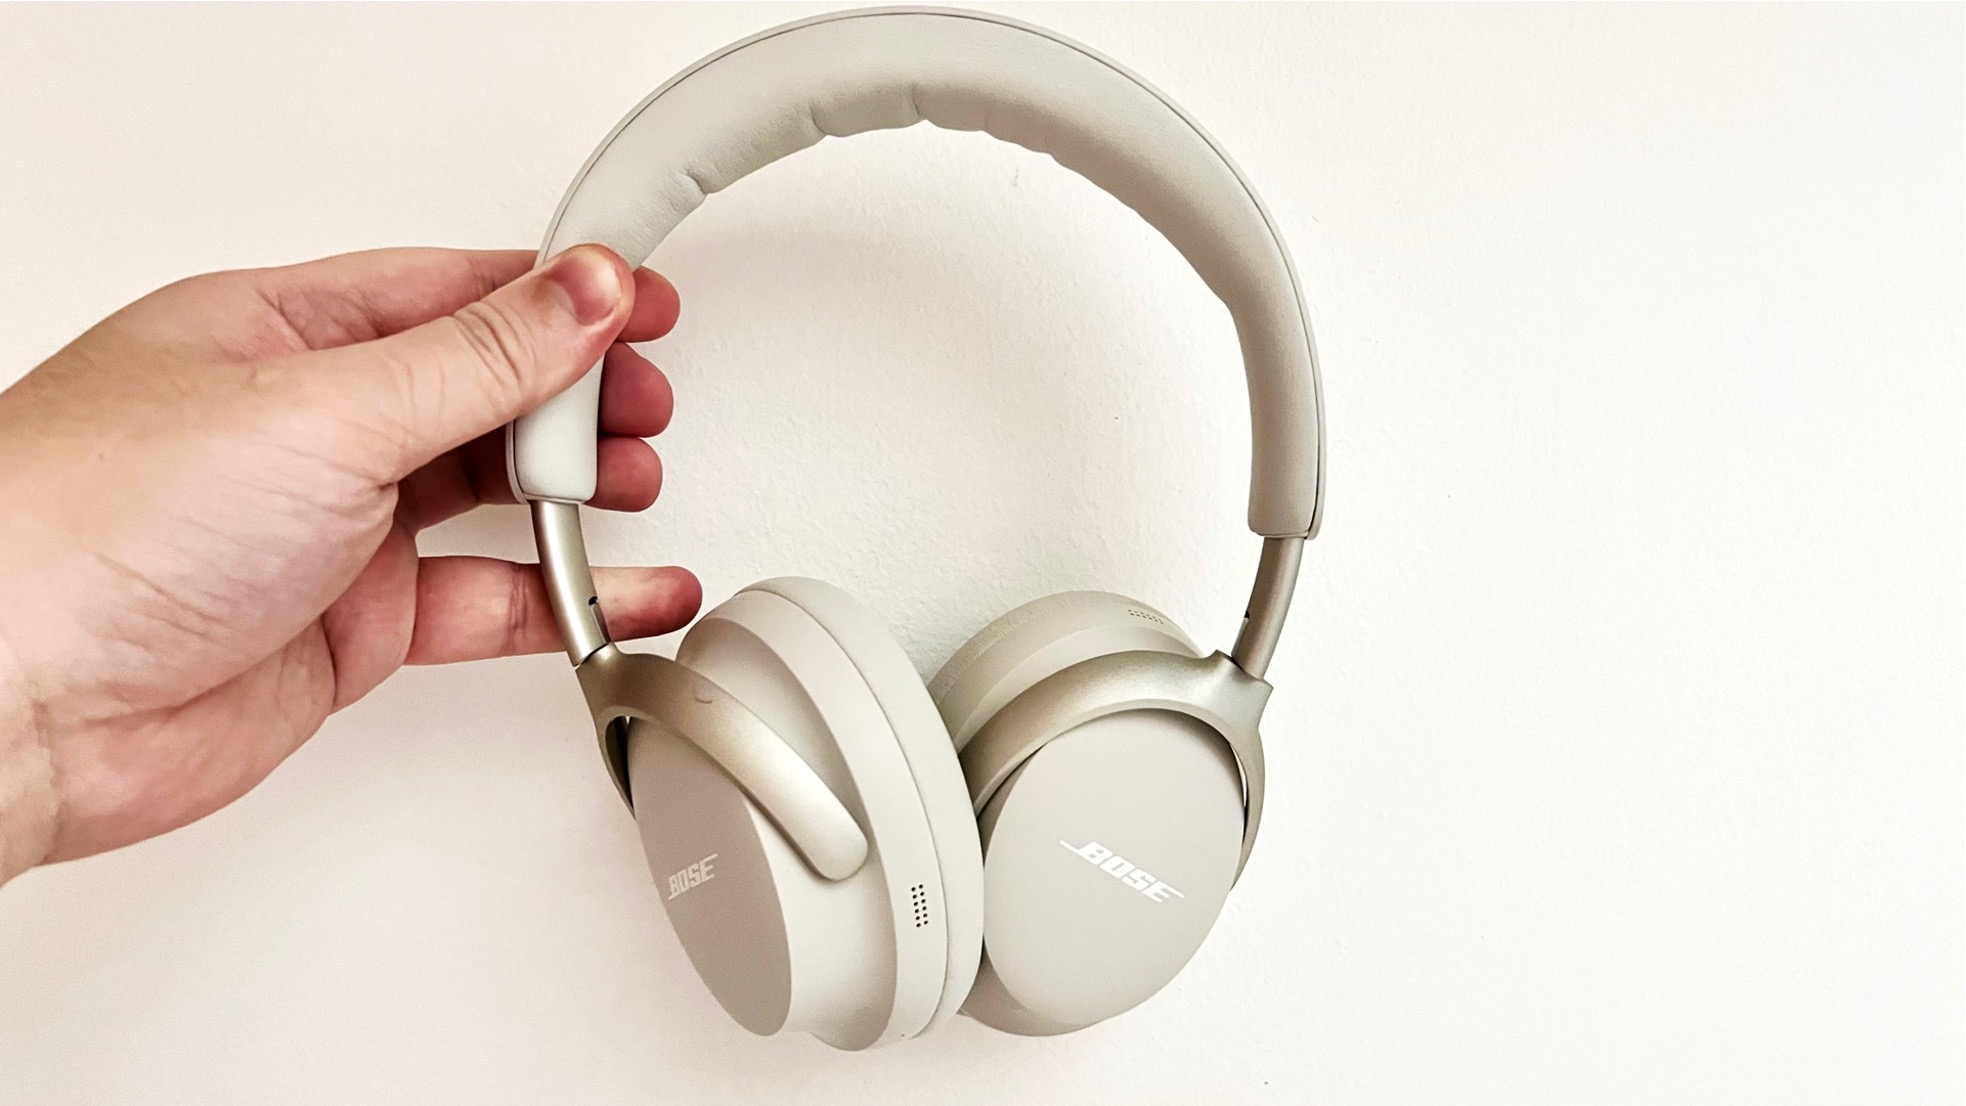 Bose showed me the QuietComfort Headphones Ultra and the ANC blew me away